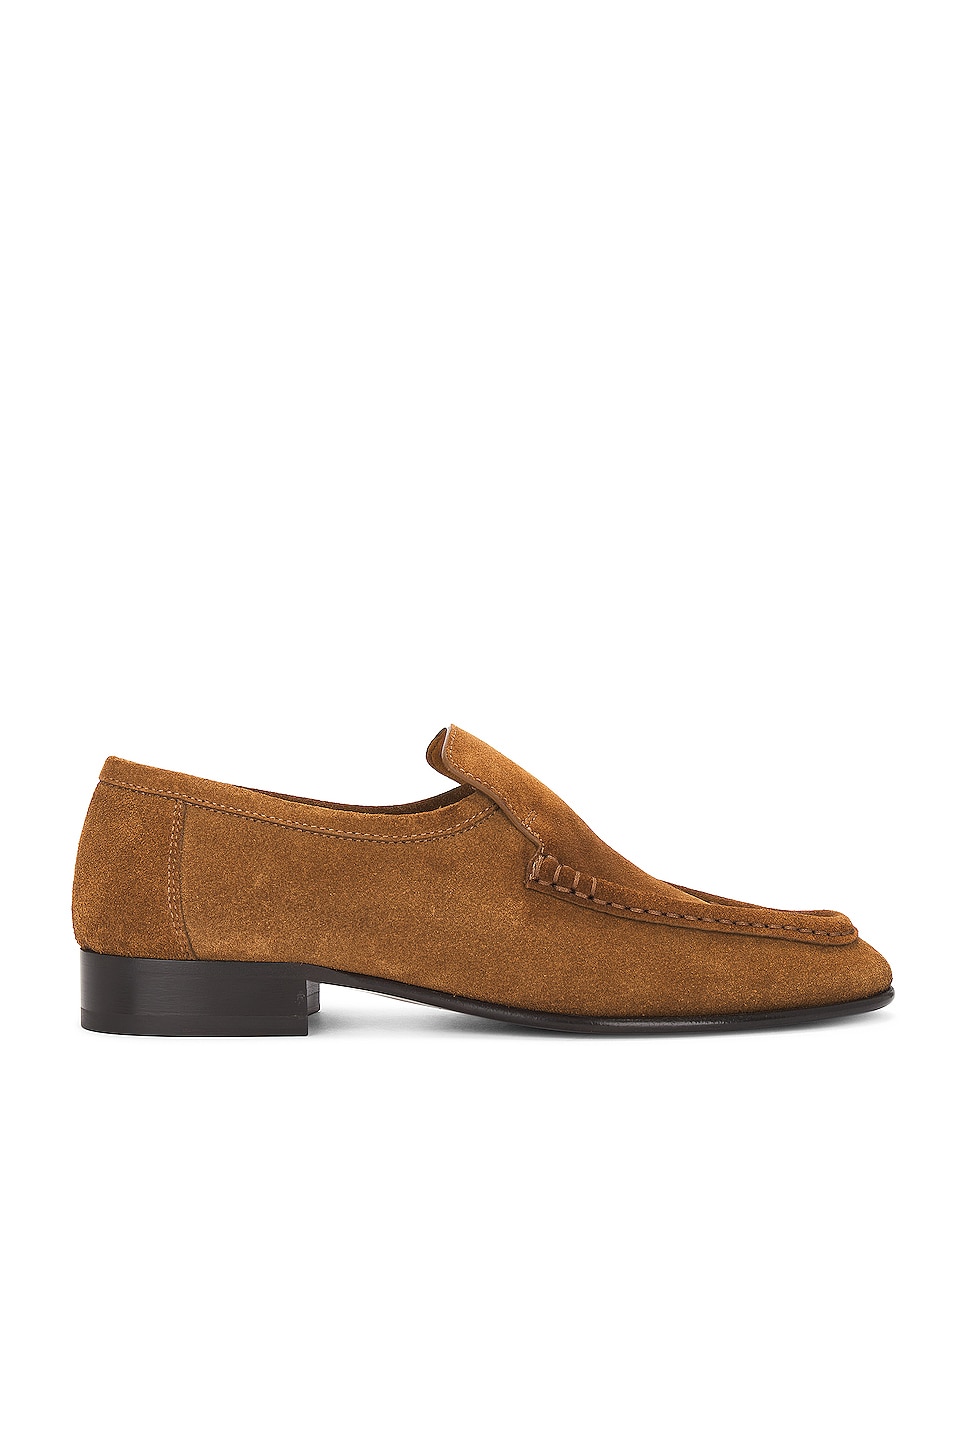 Image 1 of The Row New Soft Loafer in Bark